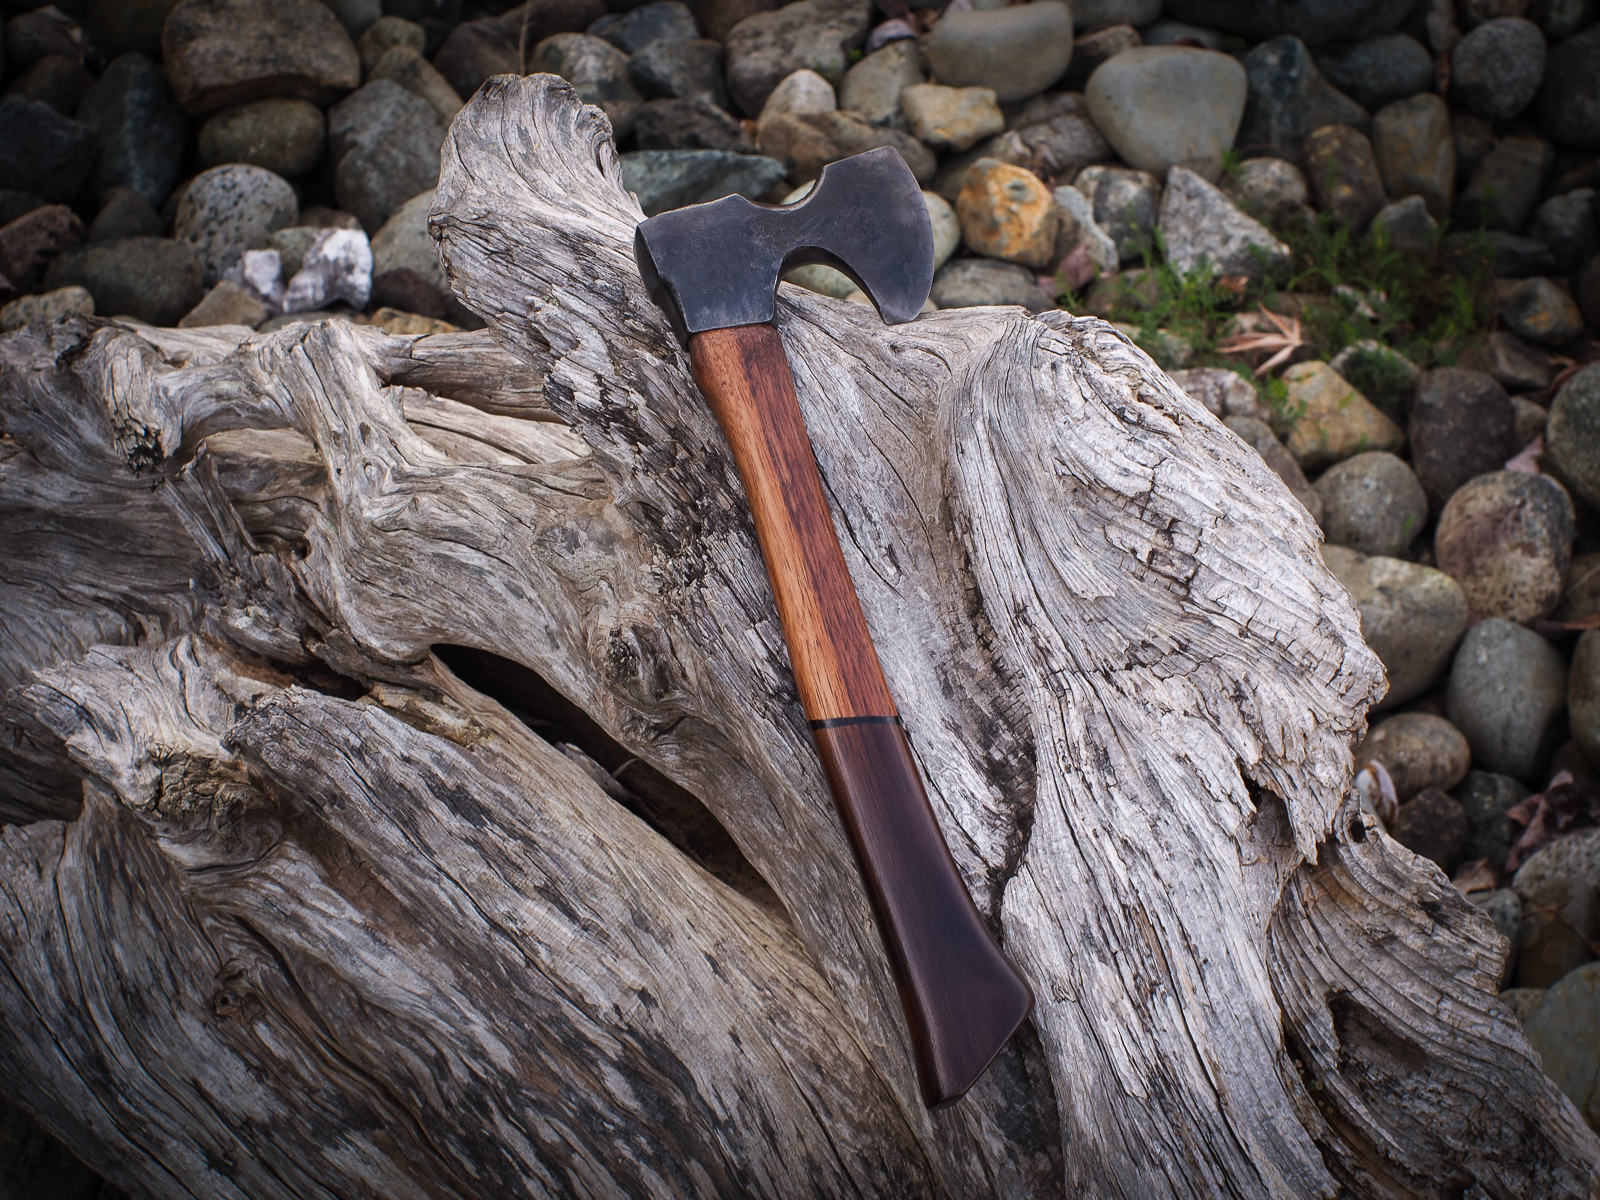 Island Blacksmith: Hand forged reclaimed hiking hatchet made from antique tools